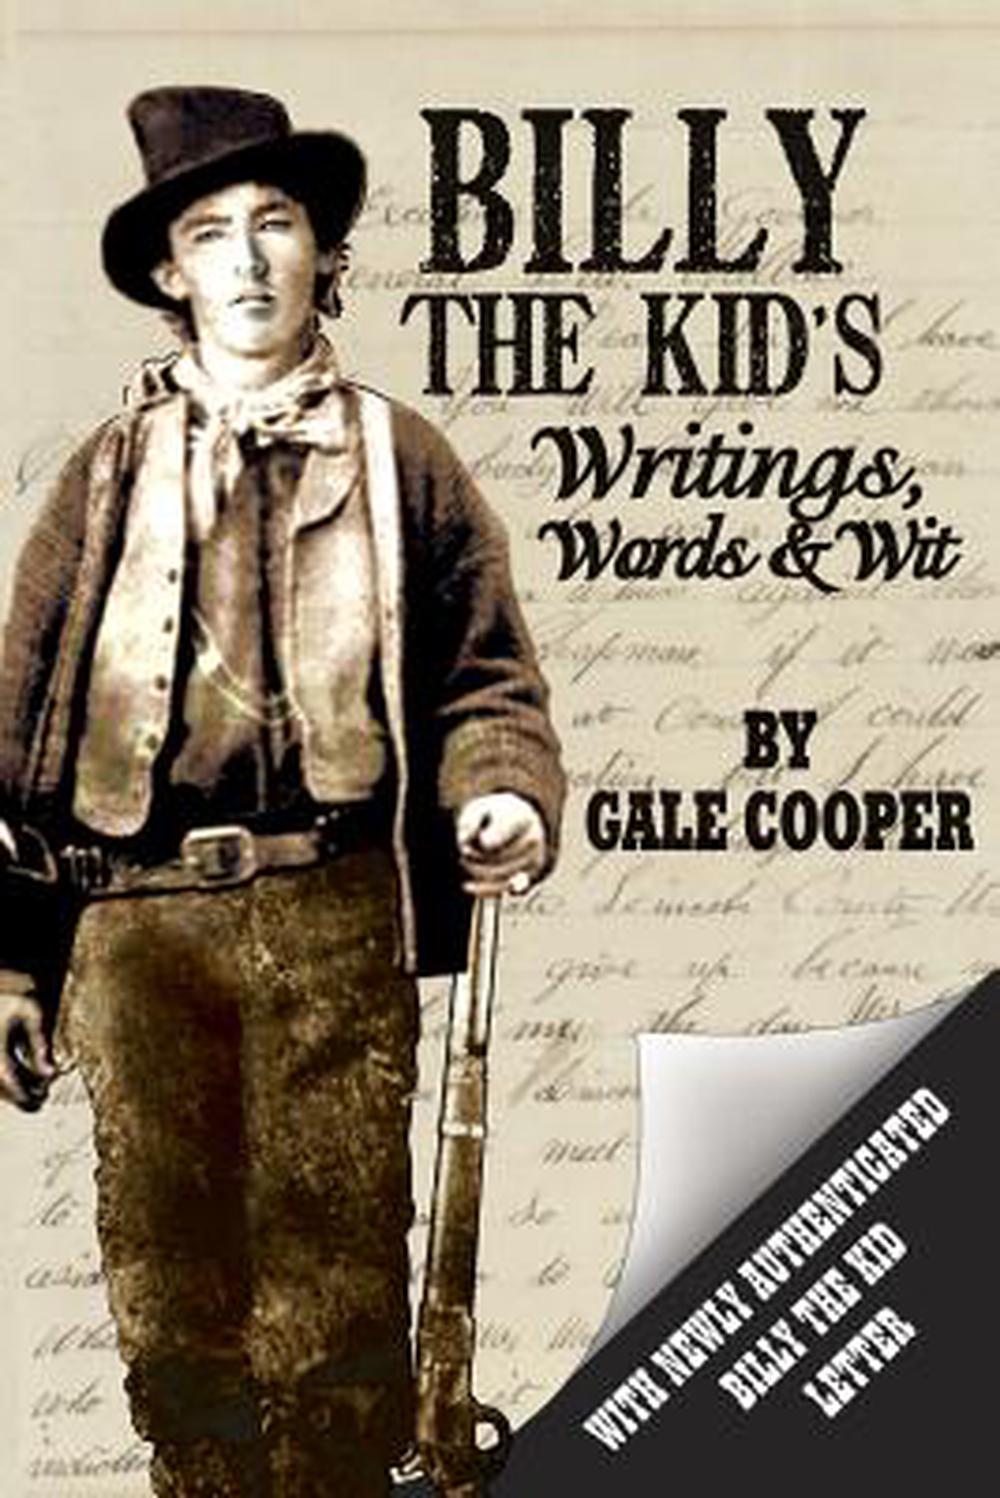 66 Top Best Writers Alias Billy The Kid Book for Kids